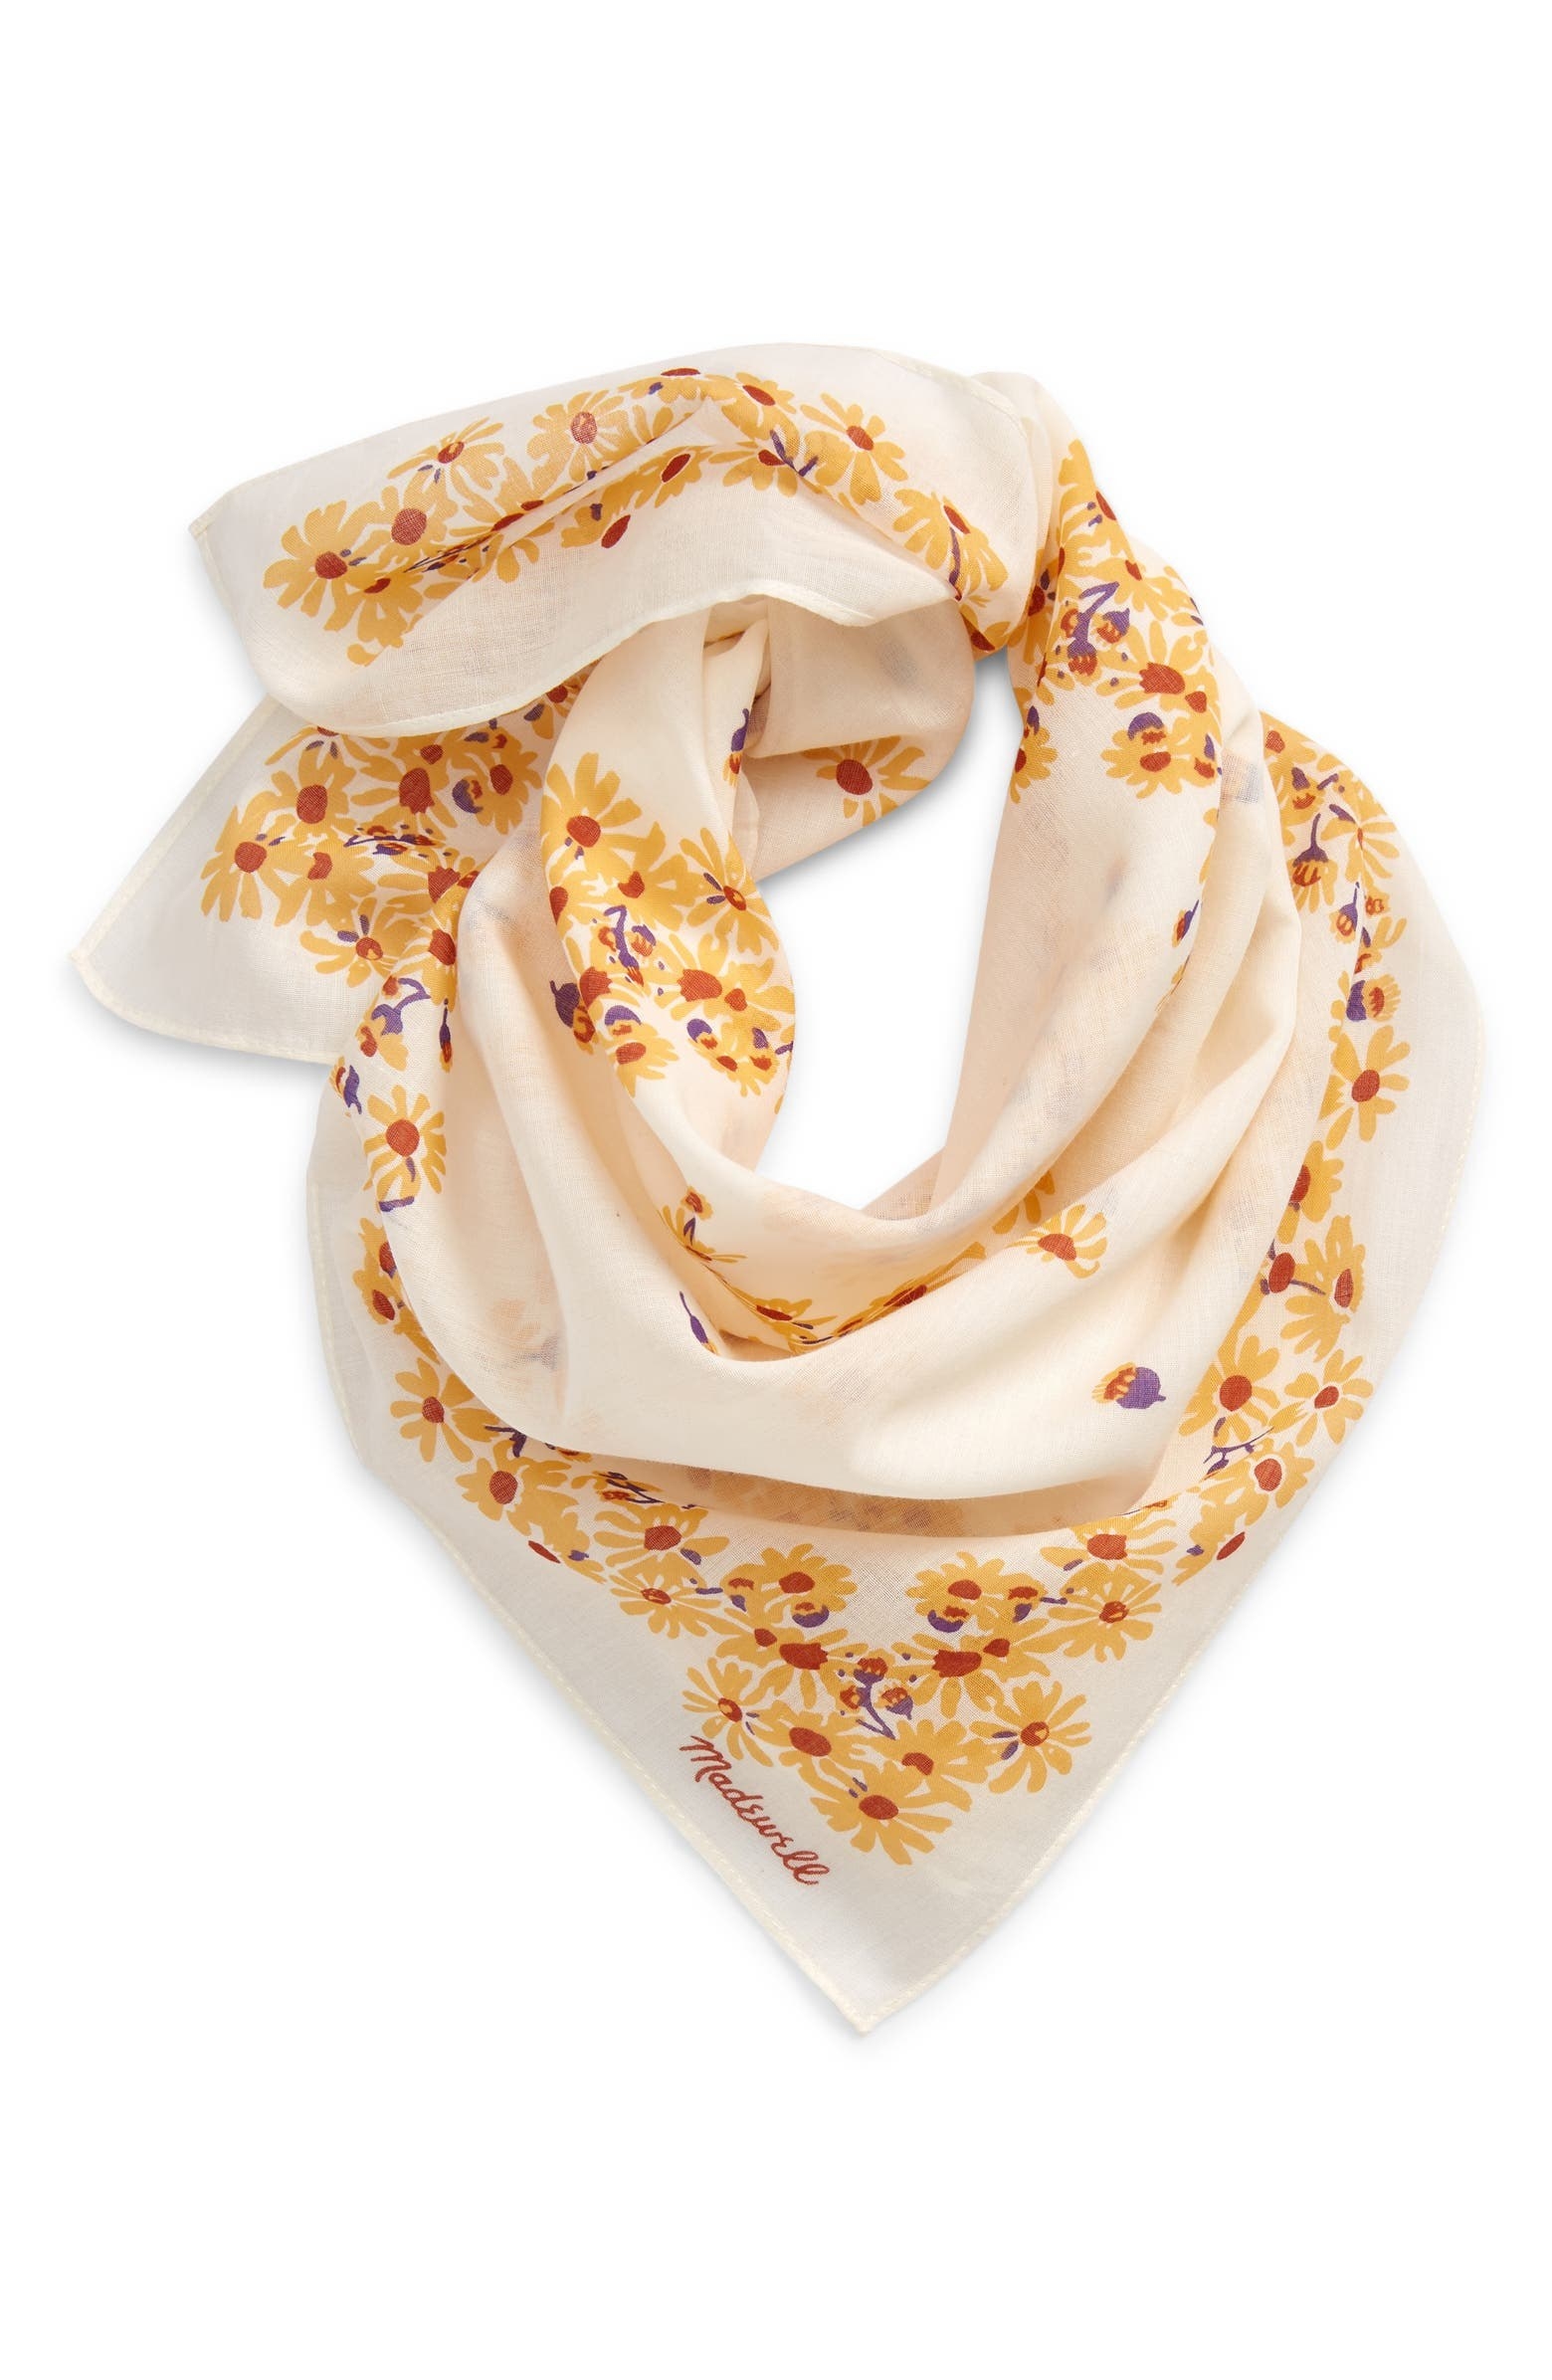 Cream bandana with yellow flowers and red and purple accents